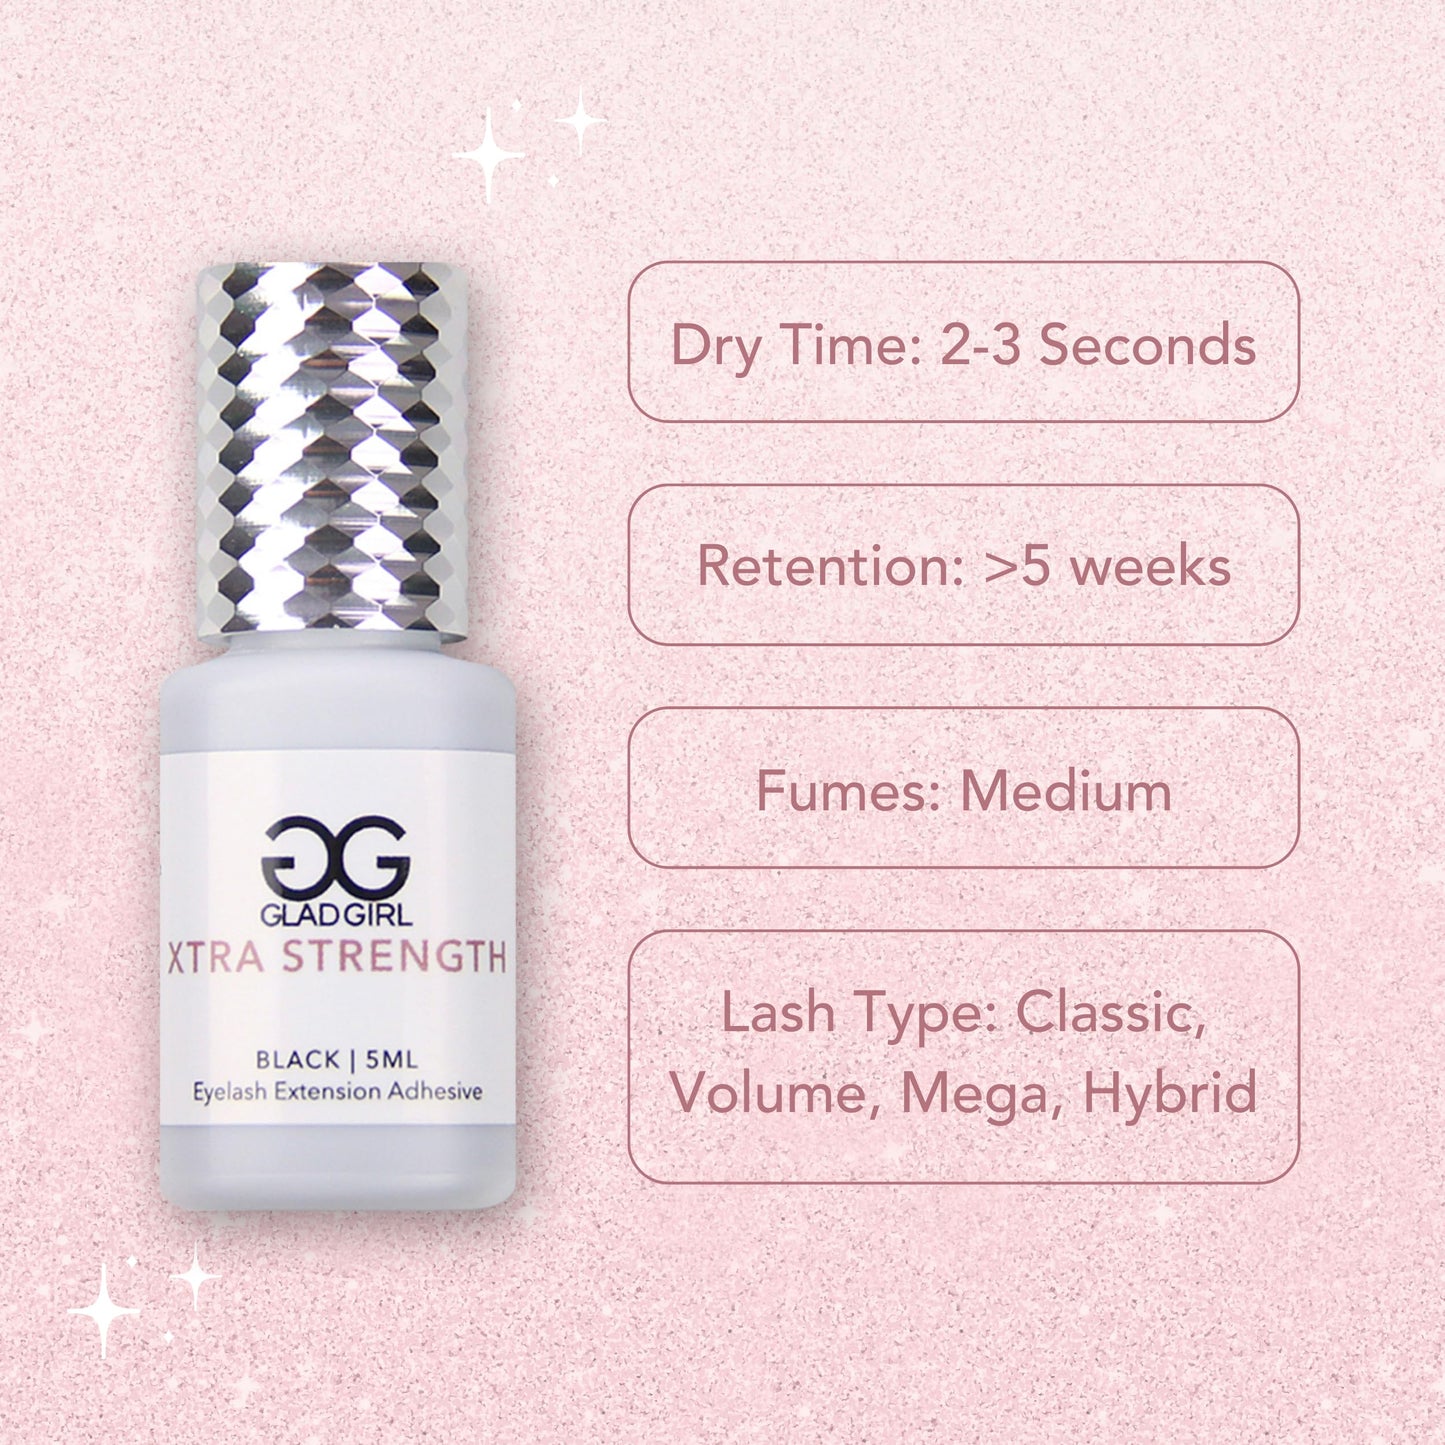 Eyelash Extension Glue by GladGirl |Mega Volume False Lash Adhesive | Quick 2-3 Second Dry Time | Low Viscosity | Extra Strong Hold | 5ml